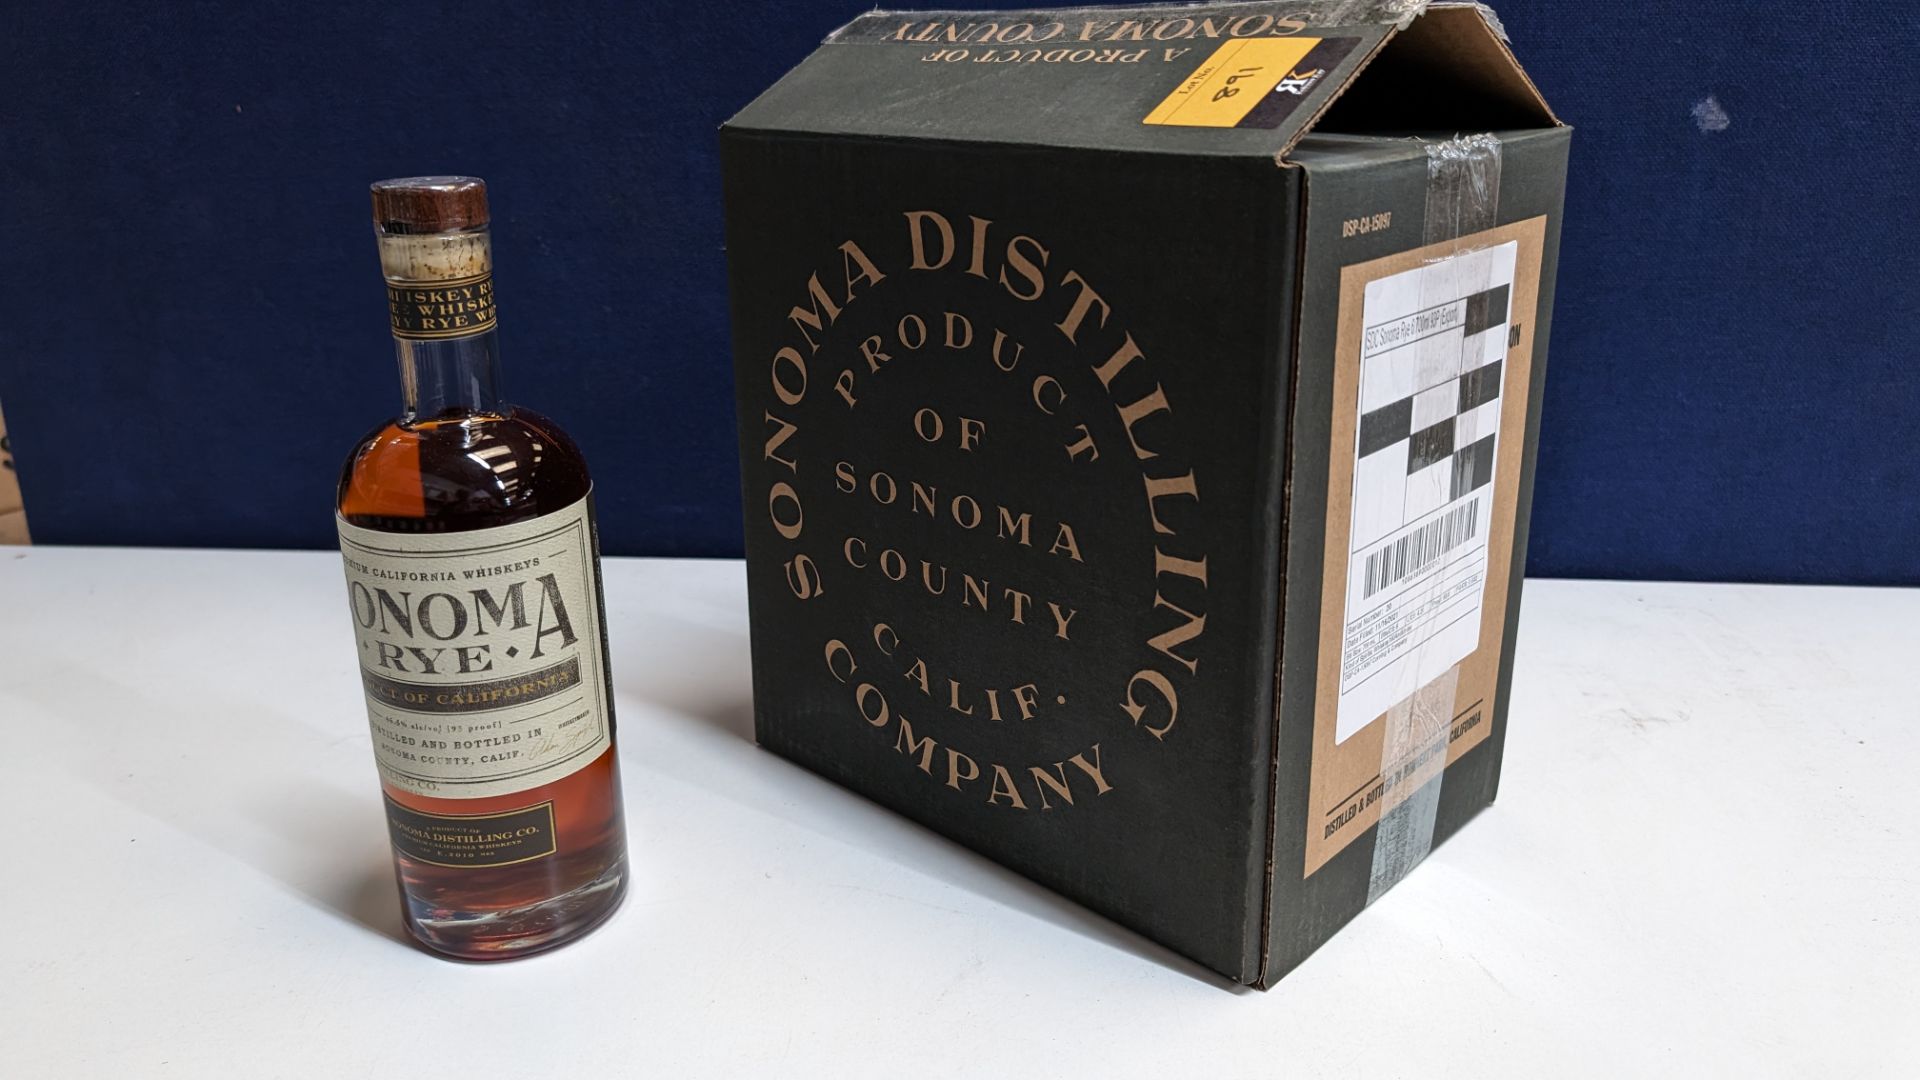 6 off 700ml bottles of Sonoma Rye Whiskey. In Sonoma branded box which includes bottling details on - Image 2 of 7